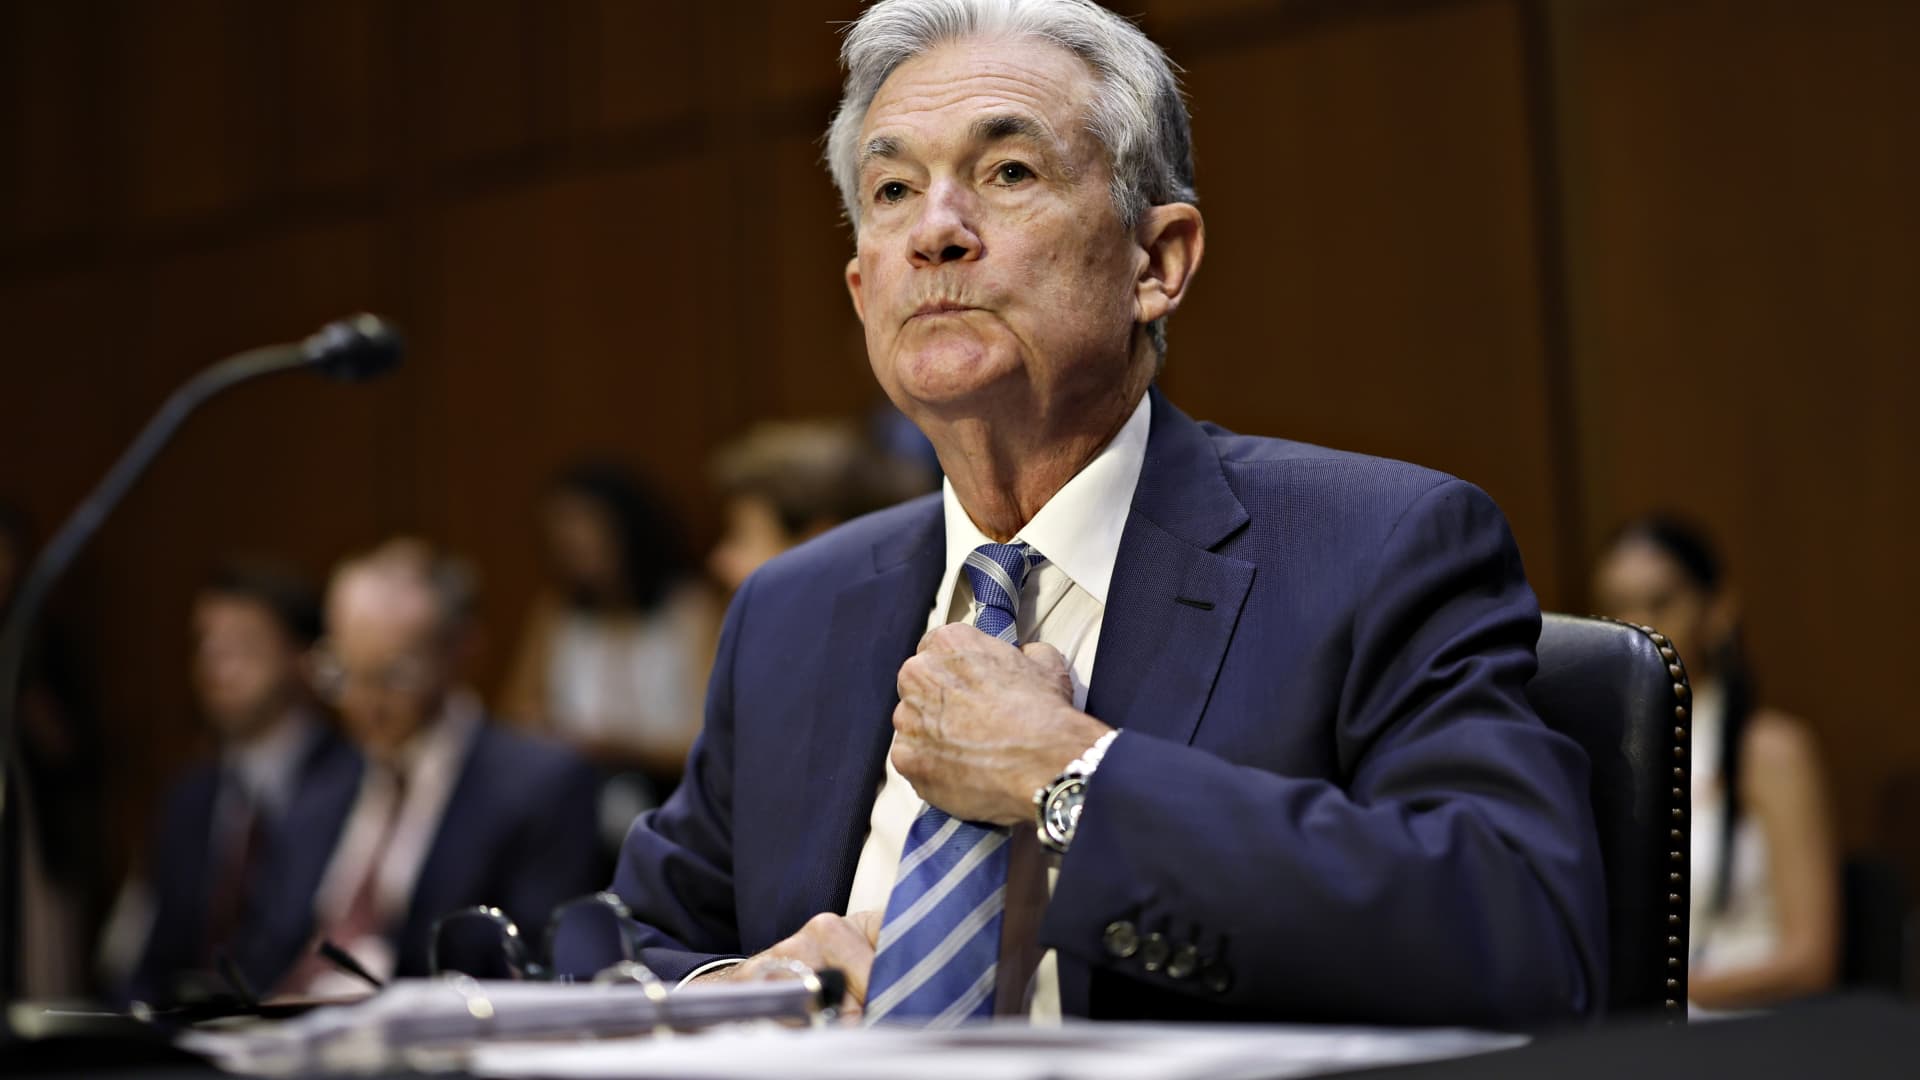 Powell tells Congress the Fed is ‘strongly dedicated’ on inflation, notes recession is a ‘chance’